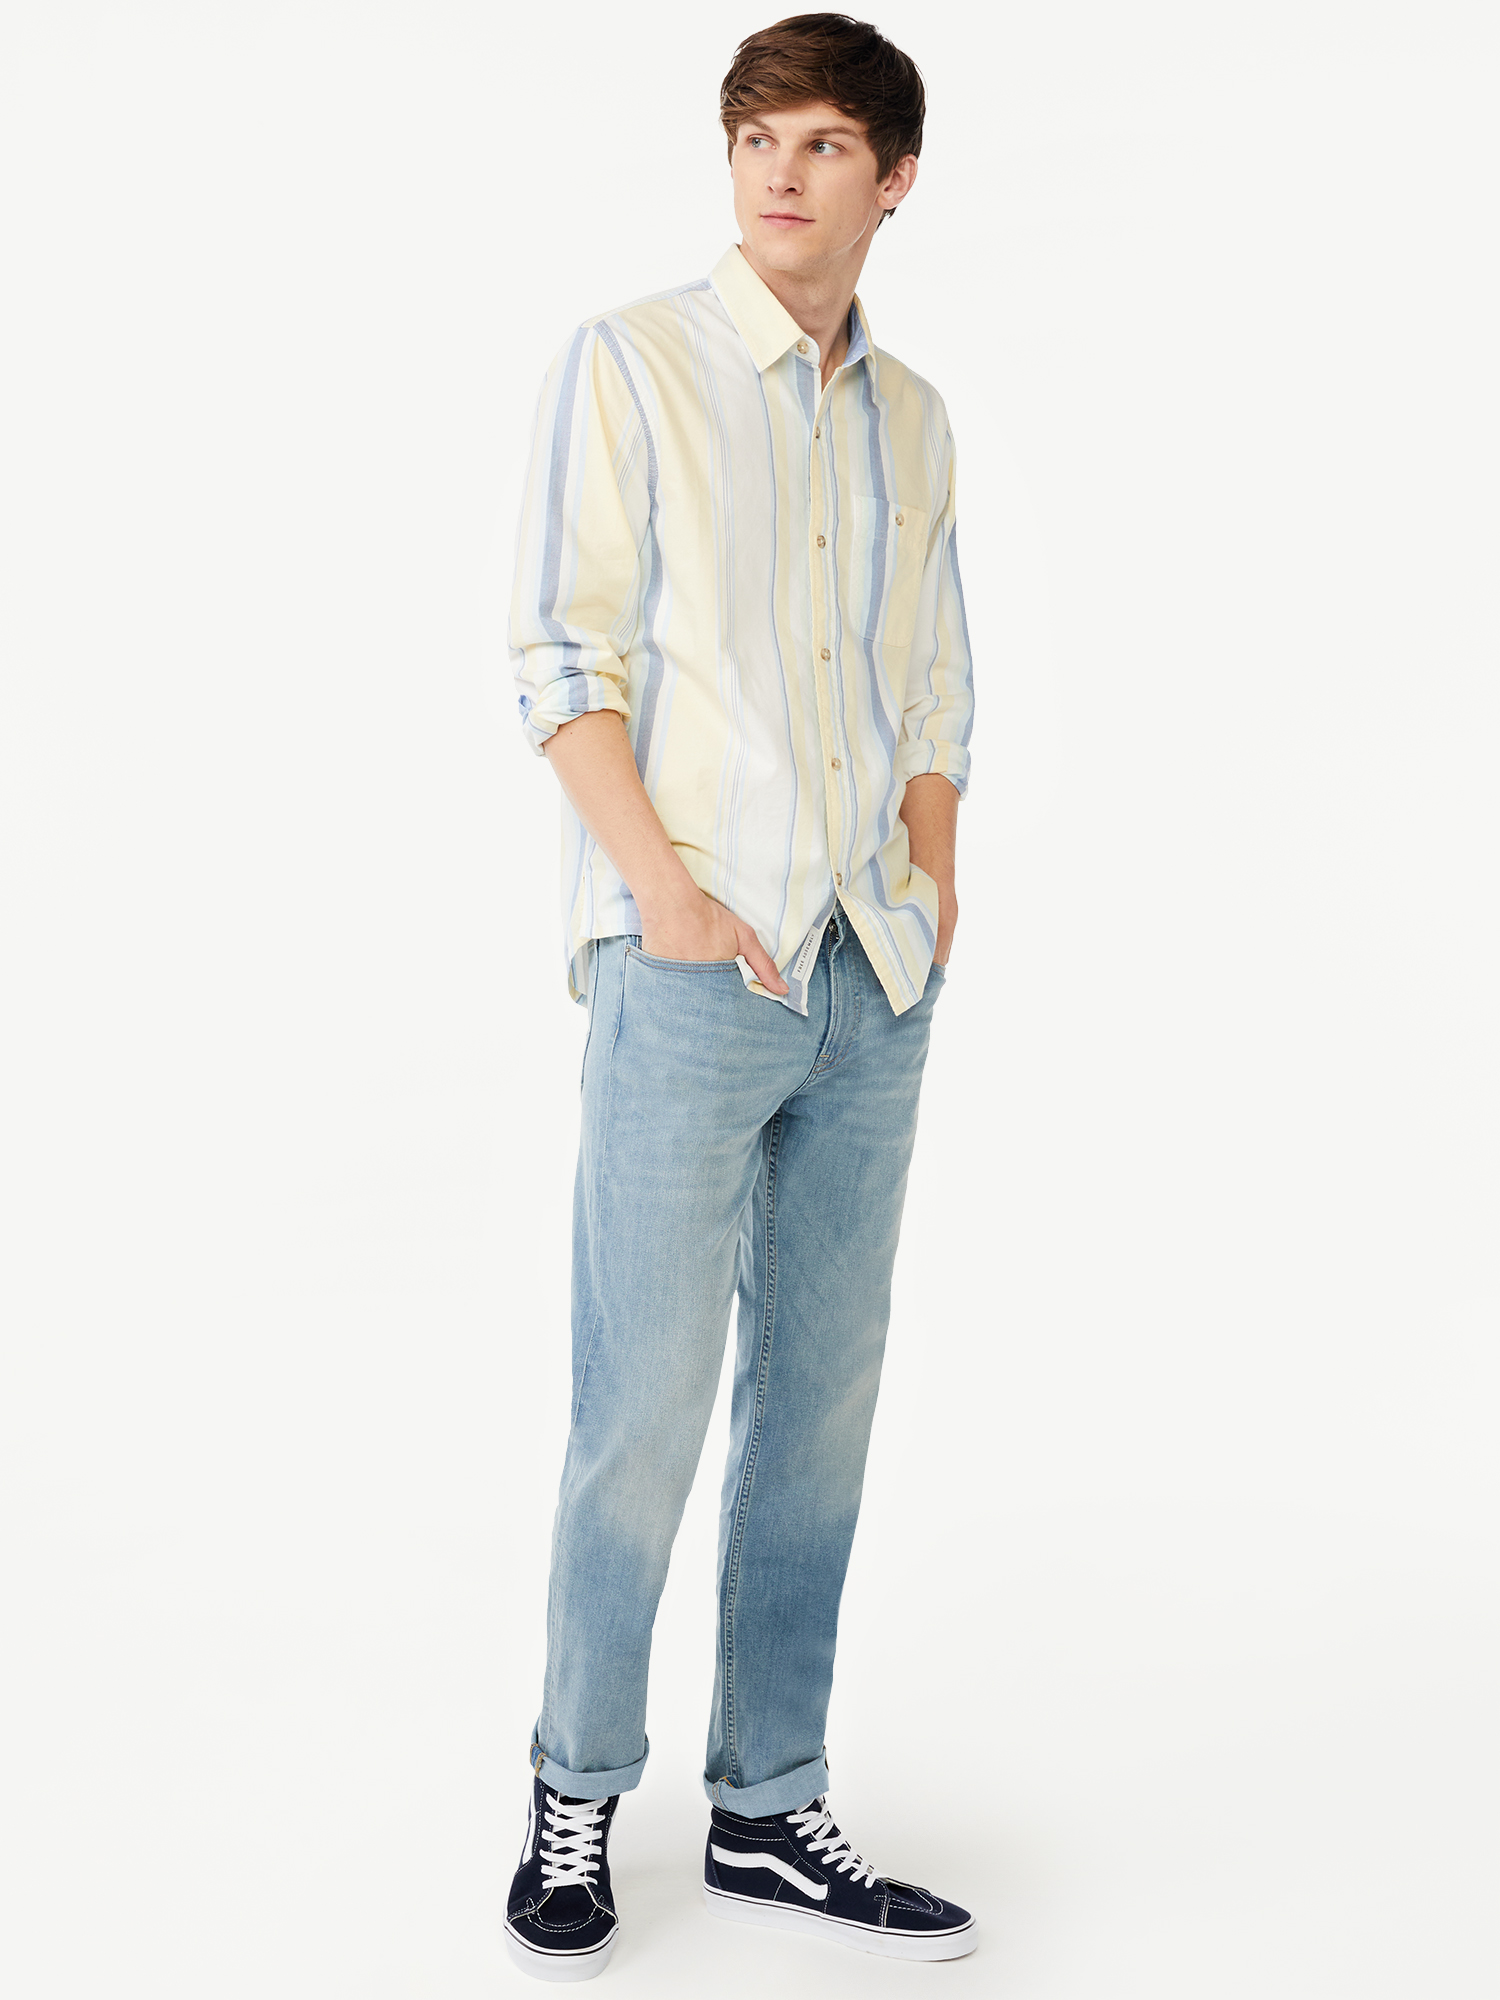 Free Assembly Men's Mid Rise Slim Jeans - image 5 of 6